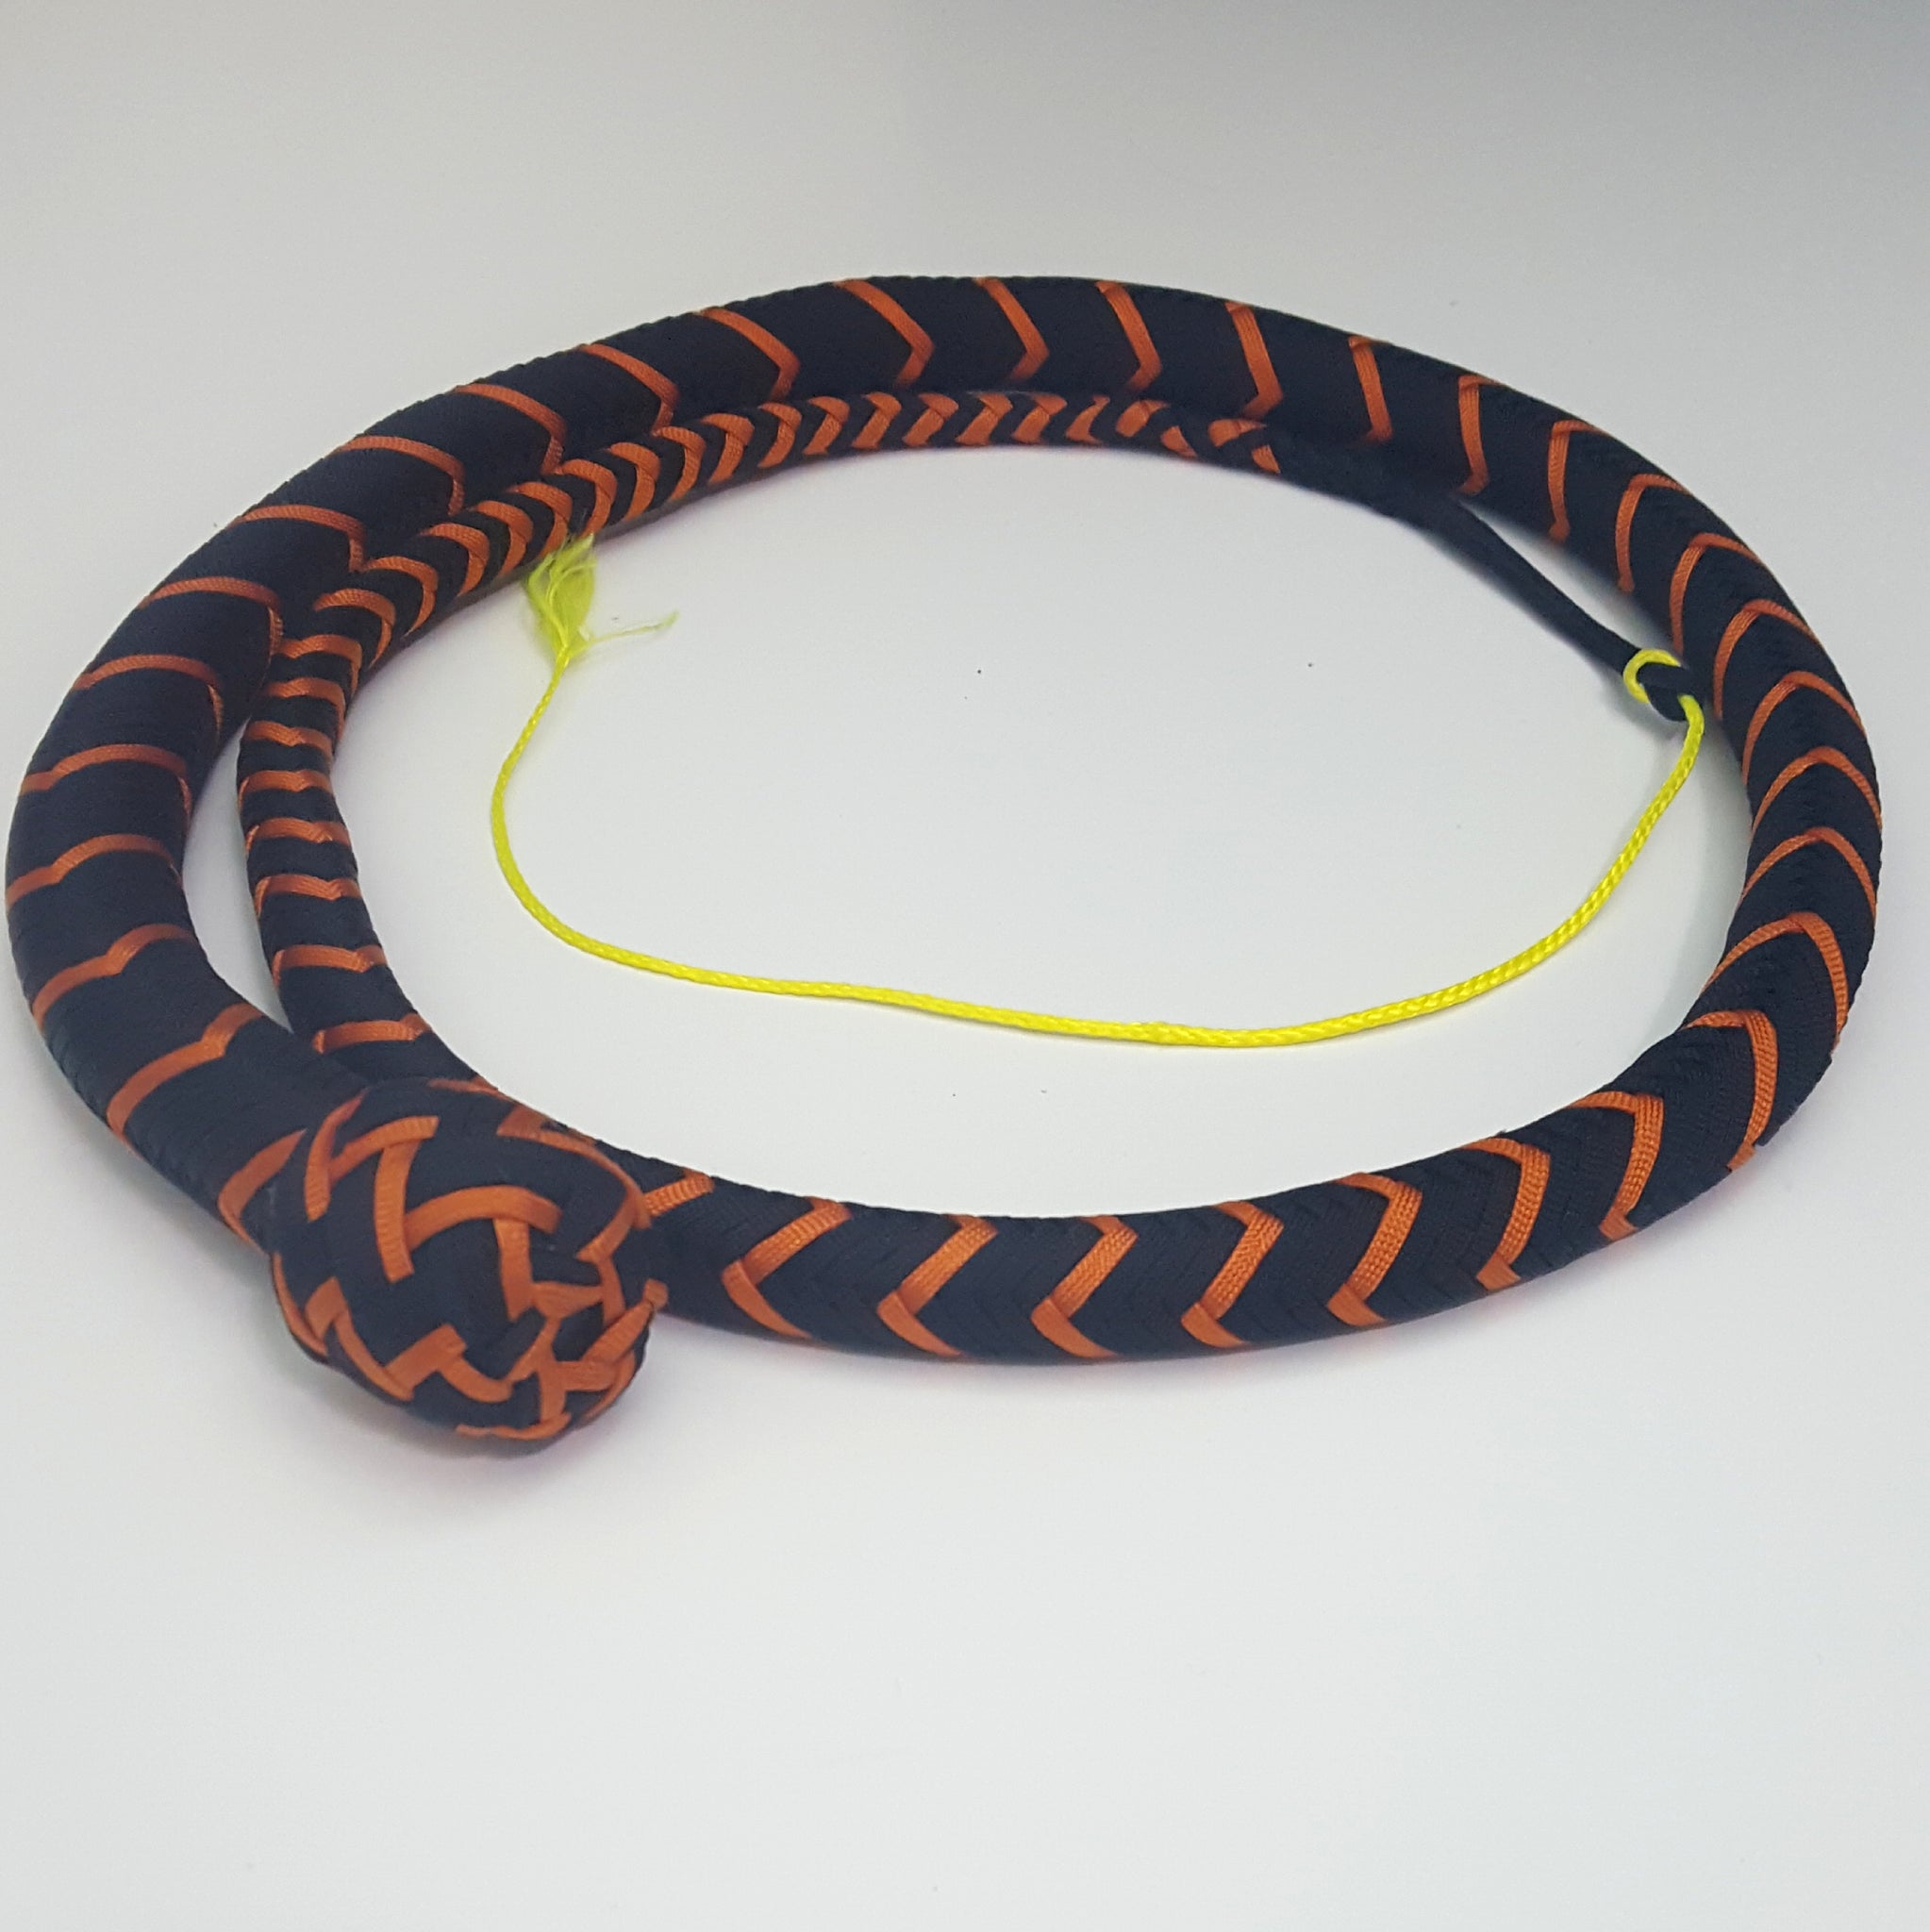 Snake Whip -Signal in Whipmaker Cord or Paracord